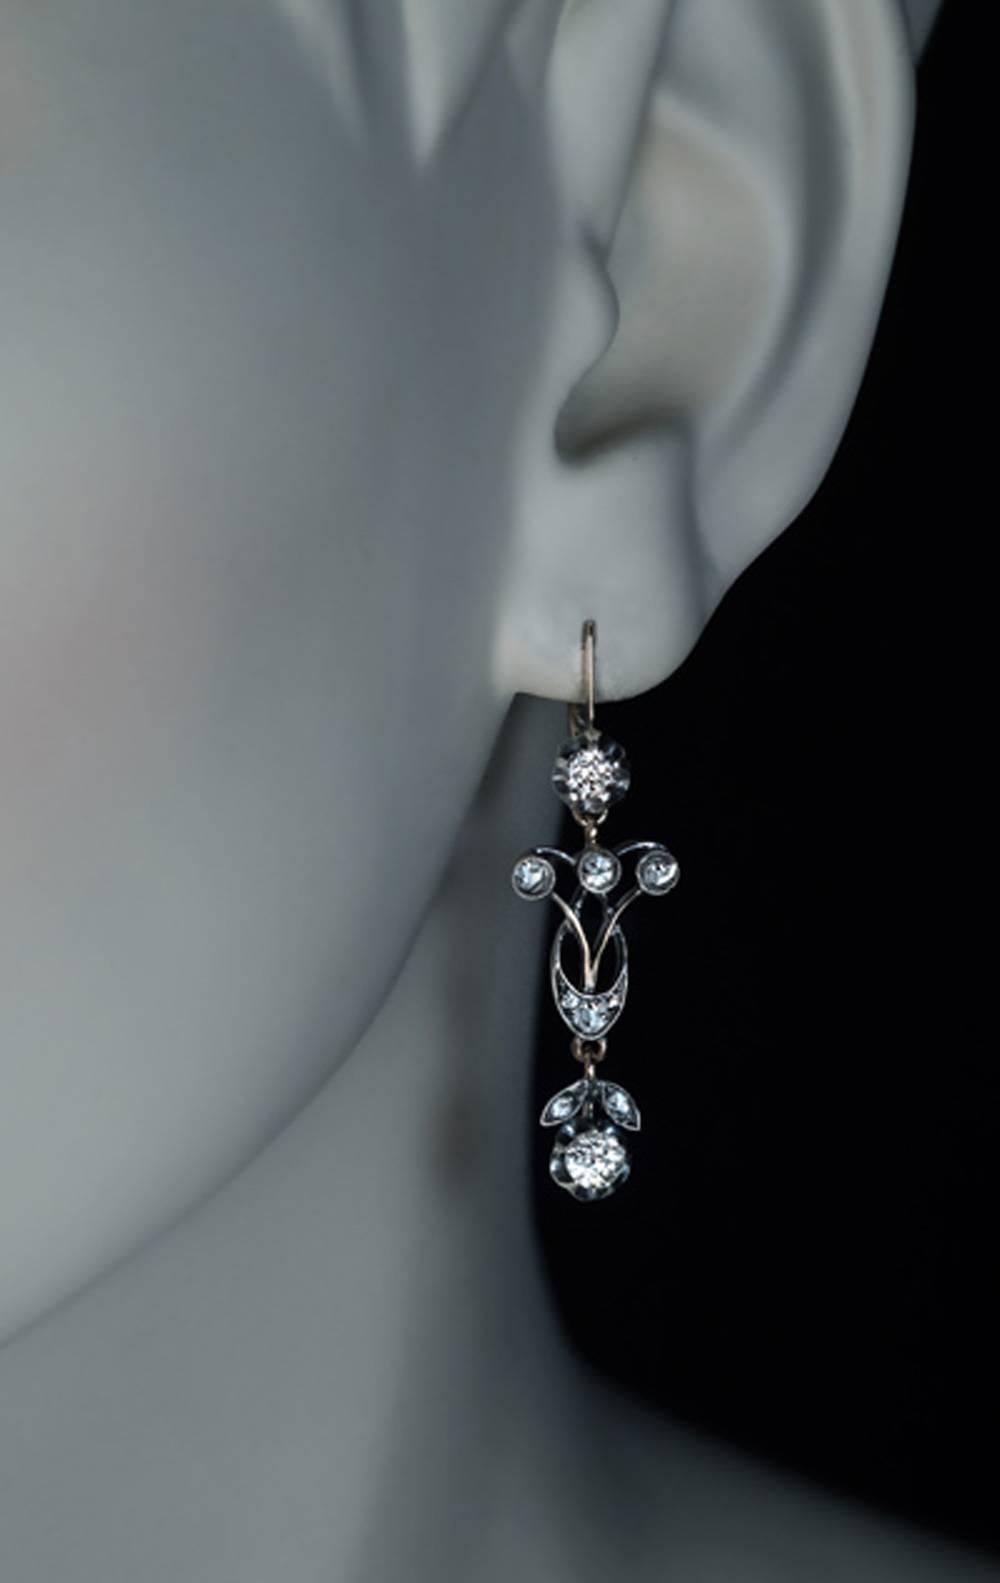 Russian, made in Moscow between 1908 and 1917
A pair of delicate antique silver over 14K gold pendant earrings is set with old European and old rose cut diamonds.
Estimated total diamond weight is 1 carat.
The earrings are marked with 56 zolotnik